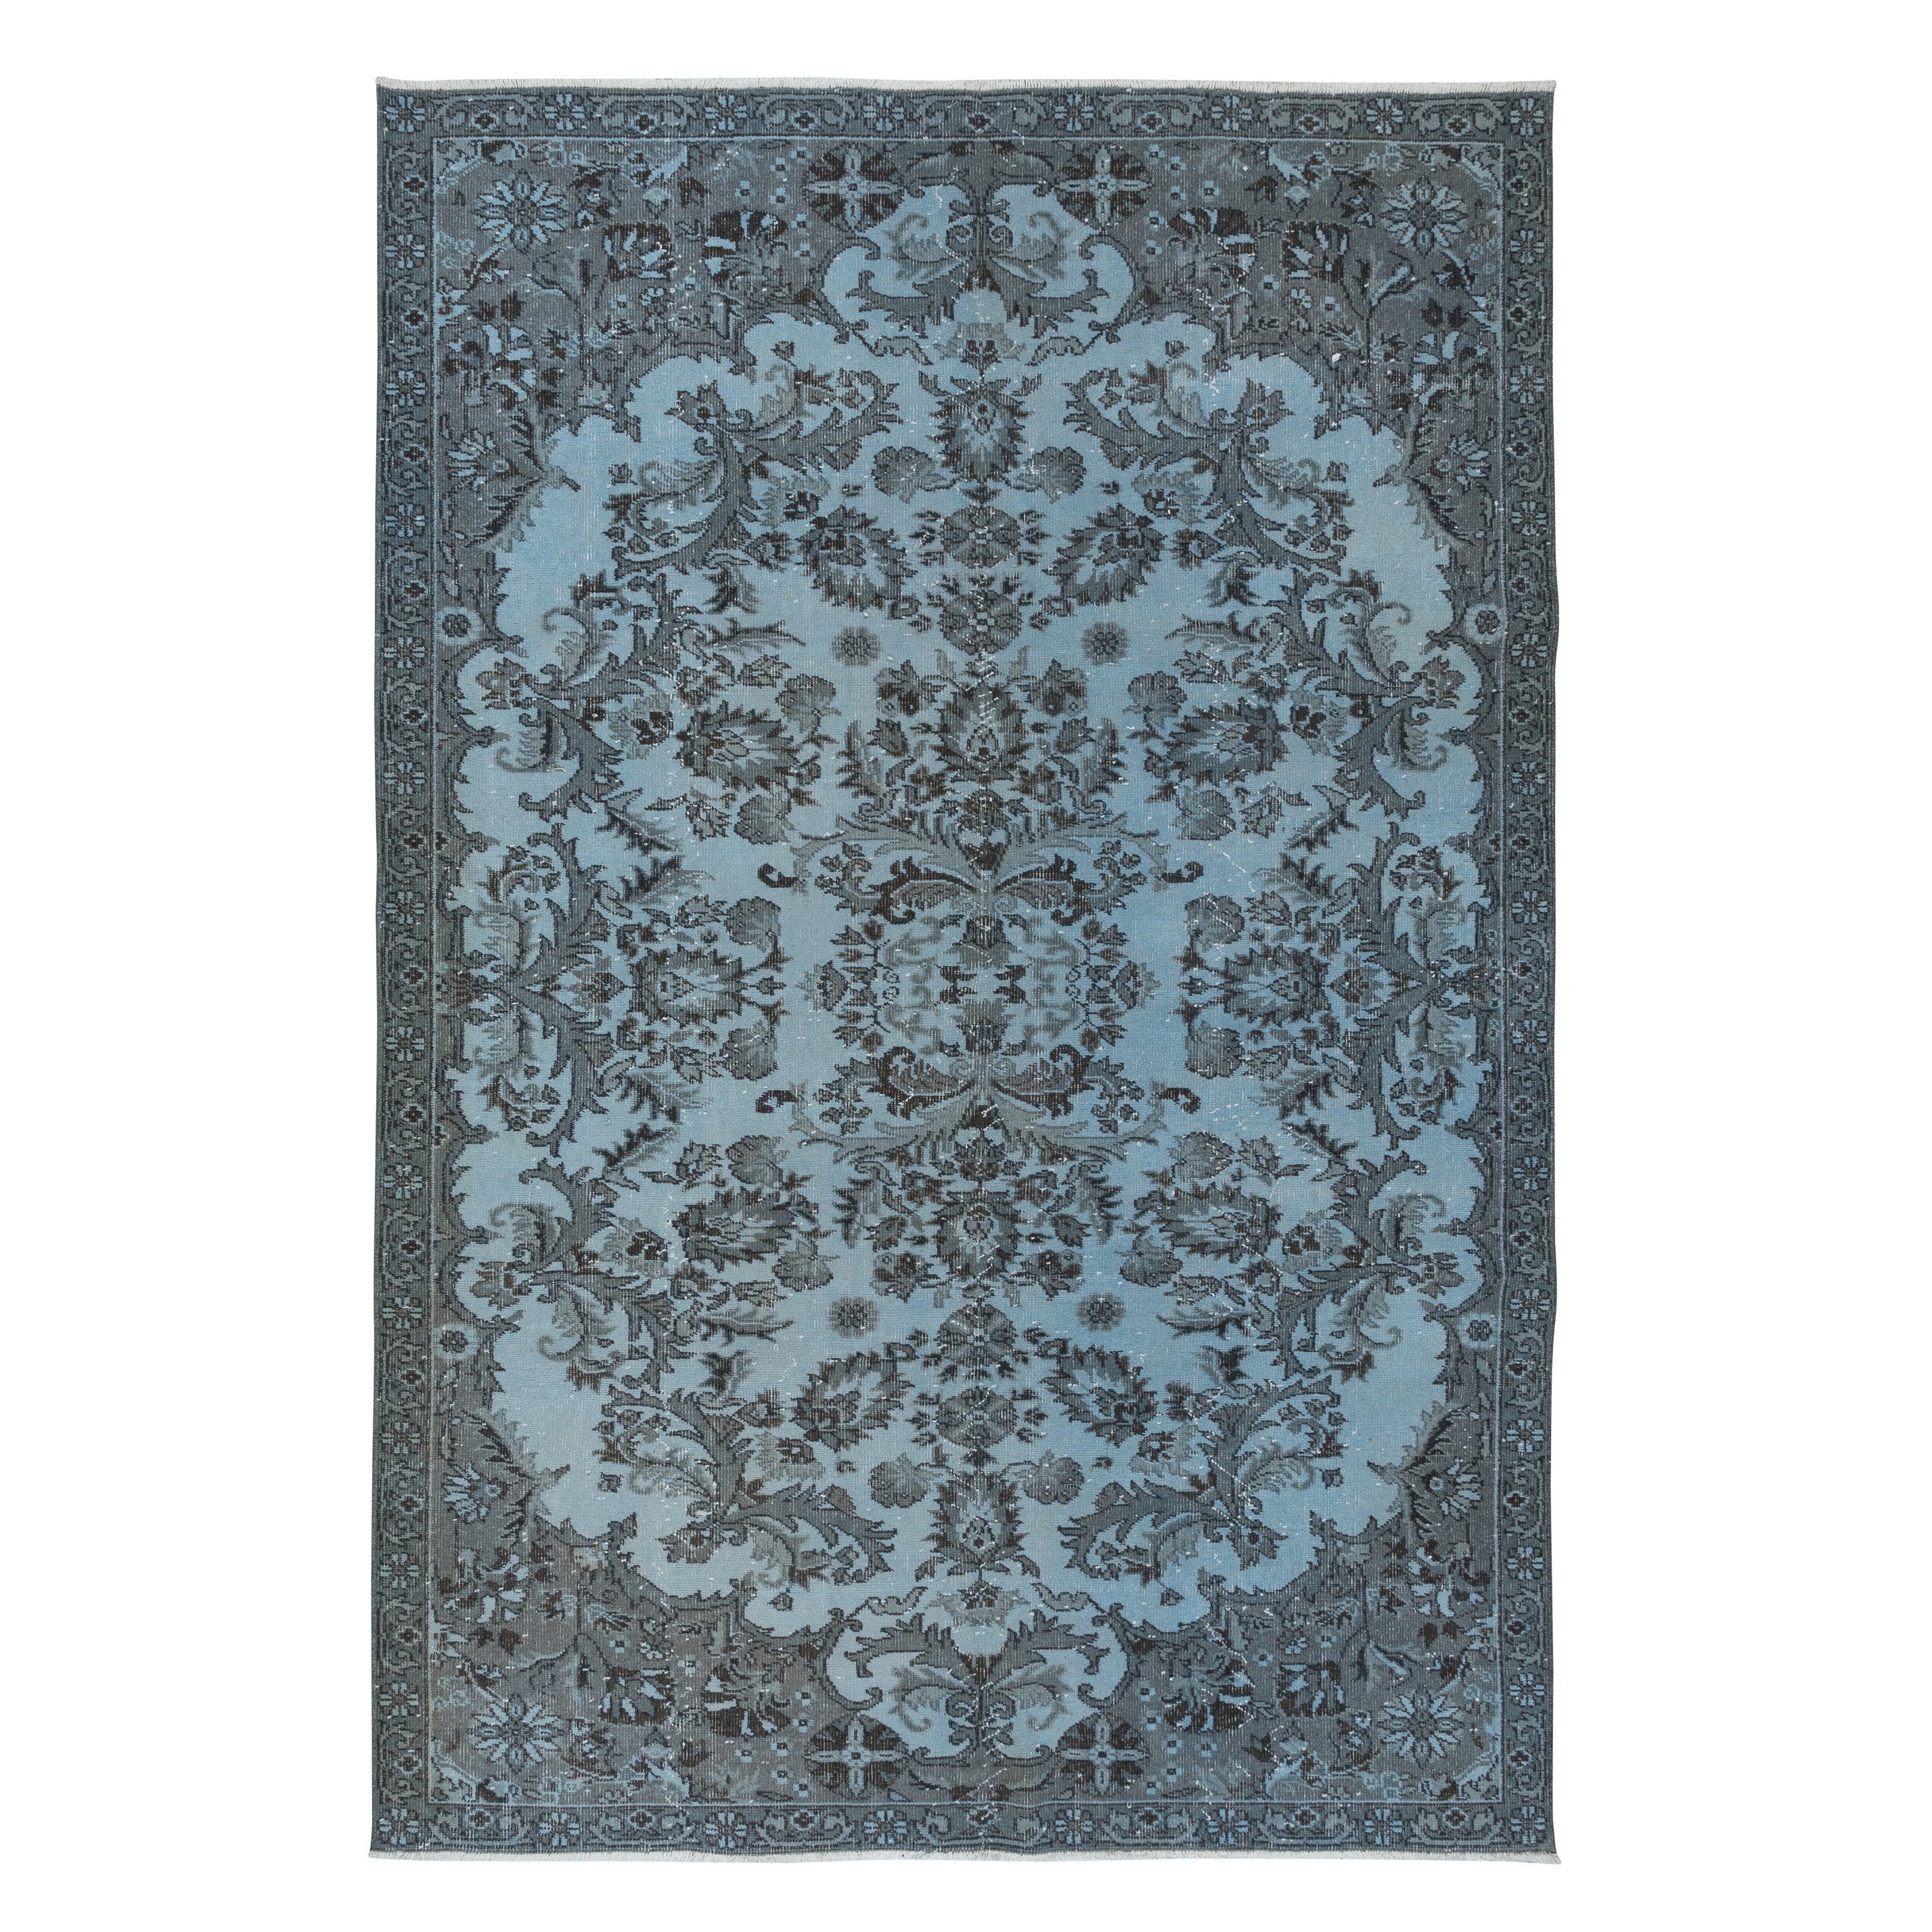 6.5x9.4 Ft Contemporary Handmade Turkish Rug in Light Blue with Garden Design For Sale